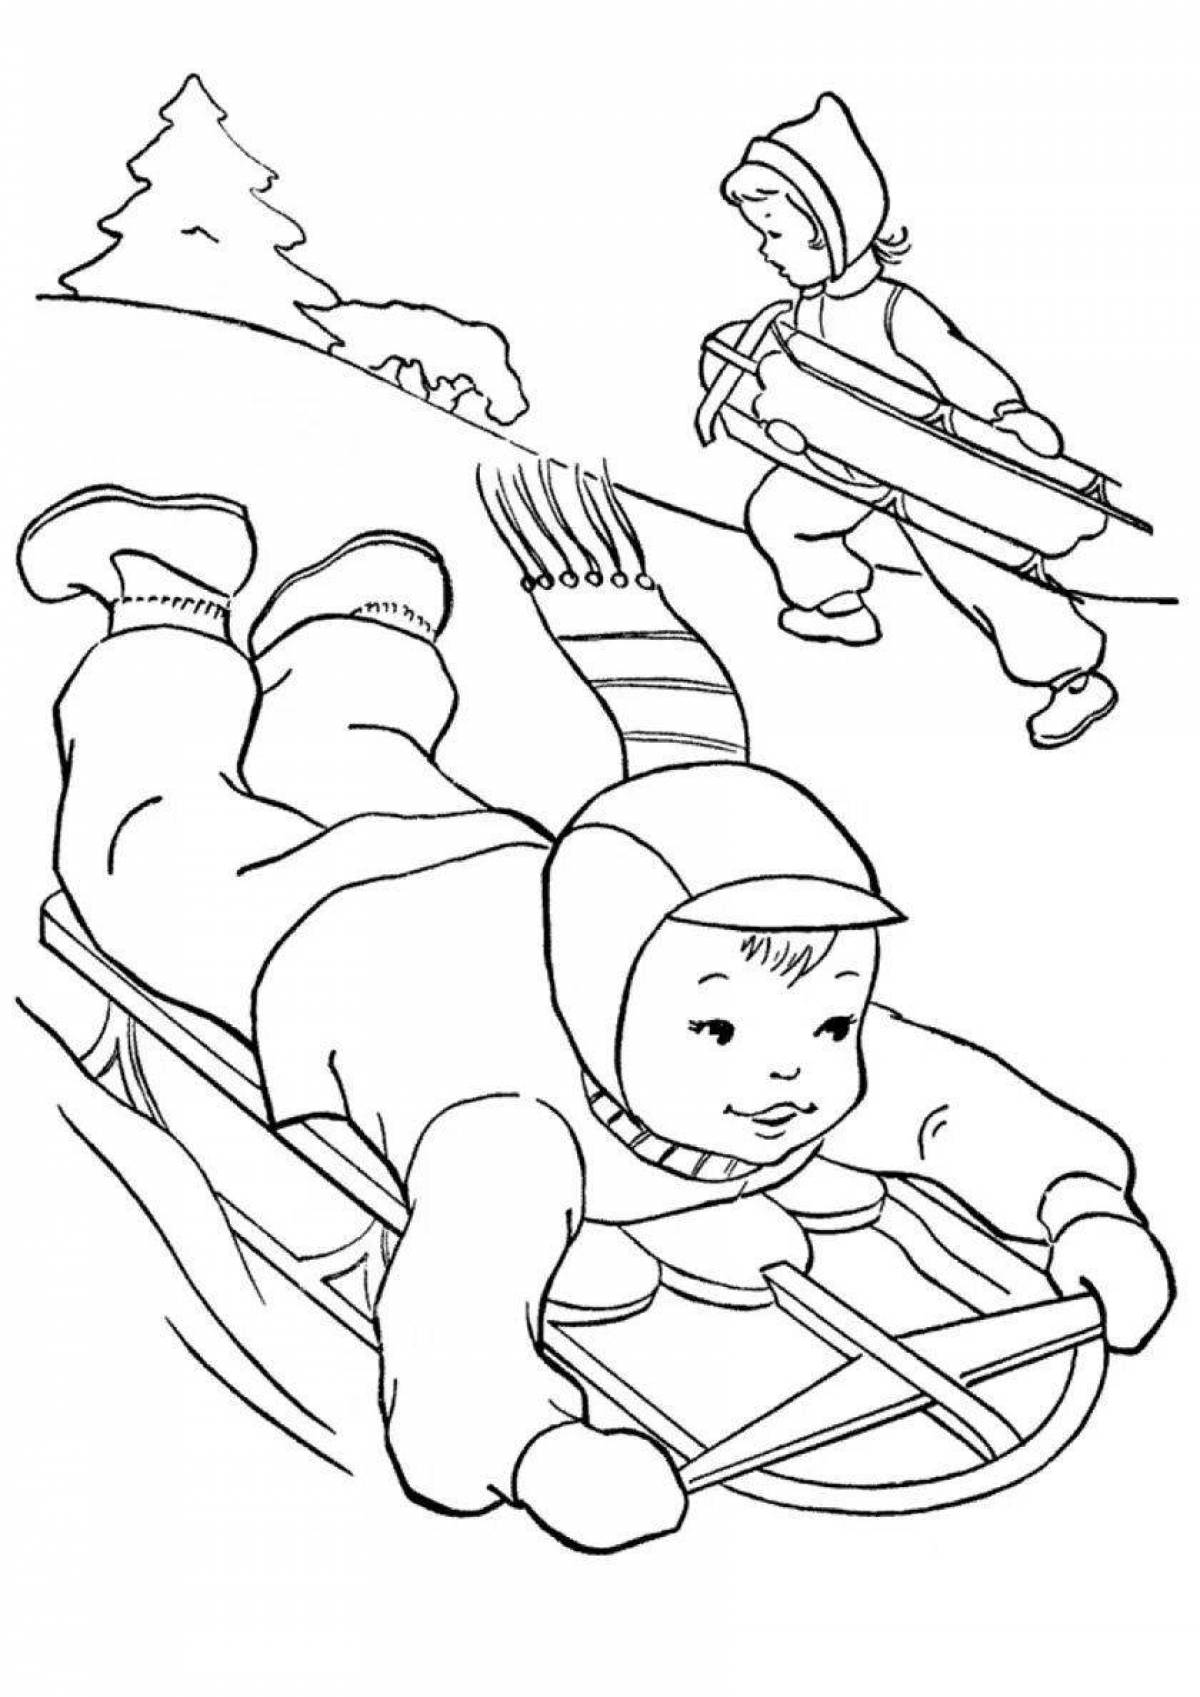 Wonderful winter sports coloring book for kids